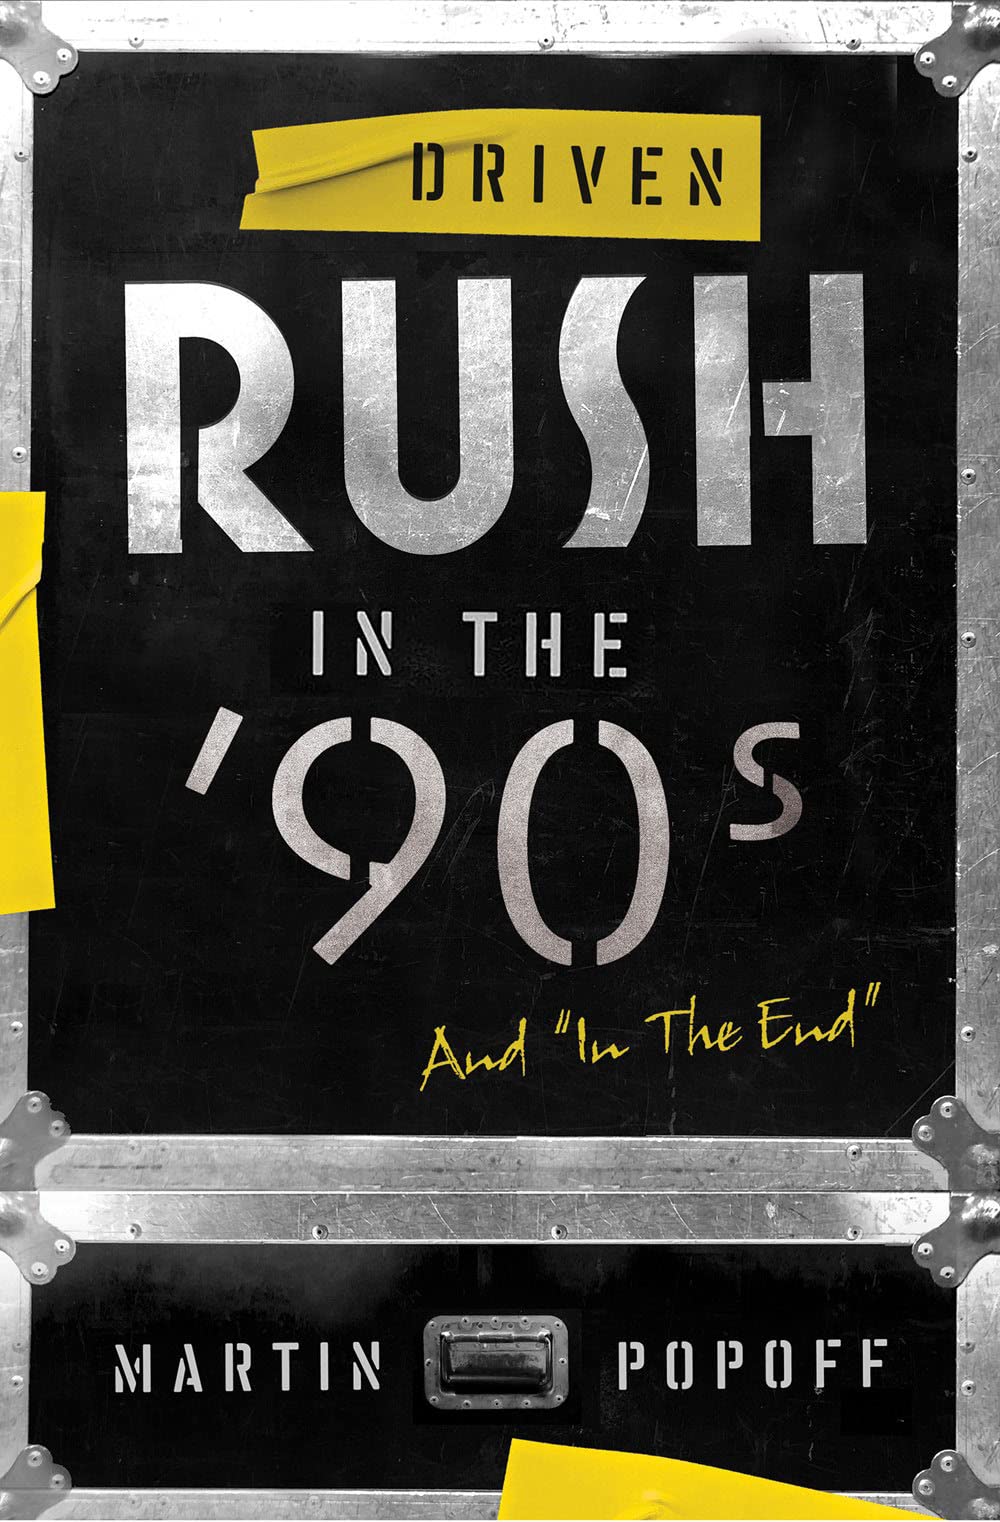 RUSH - DRIVEN: RUSH IN THE '90s AND "IN THE END" - BOOK